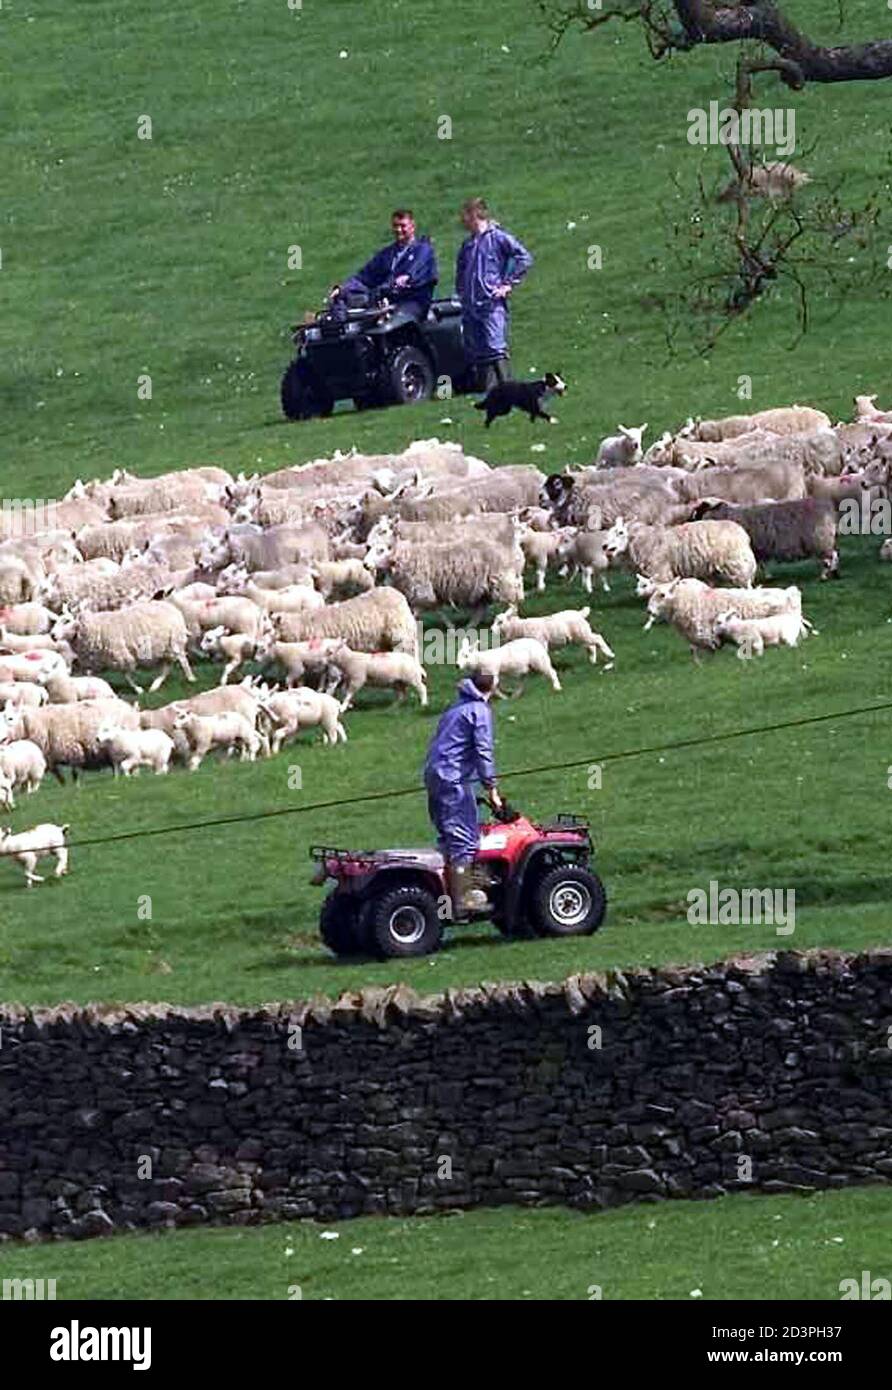 Farm workers round up sheep for slaughter at Skirbeck farm near Settle because of an outbreak of Foot-and Mouth disease, May 23, 2001. Vets from the Ministry of Agriculture and Fisheries and also the army are expected to start destroying the animals after a further 16 new cases of the disease were confirmed.  IH/CBR Stock Photo